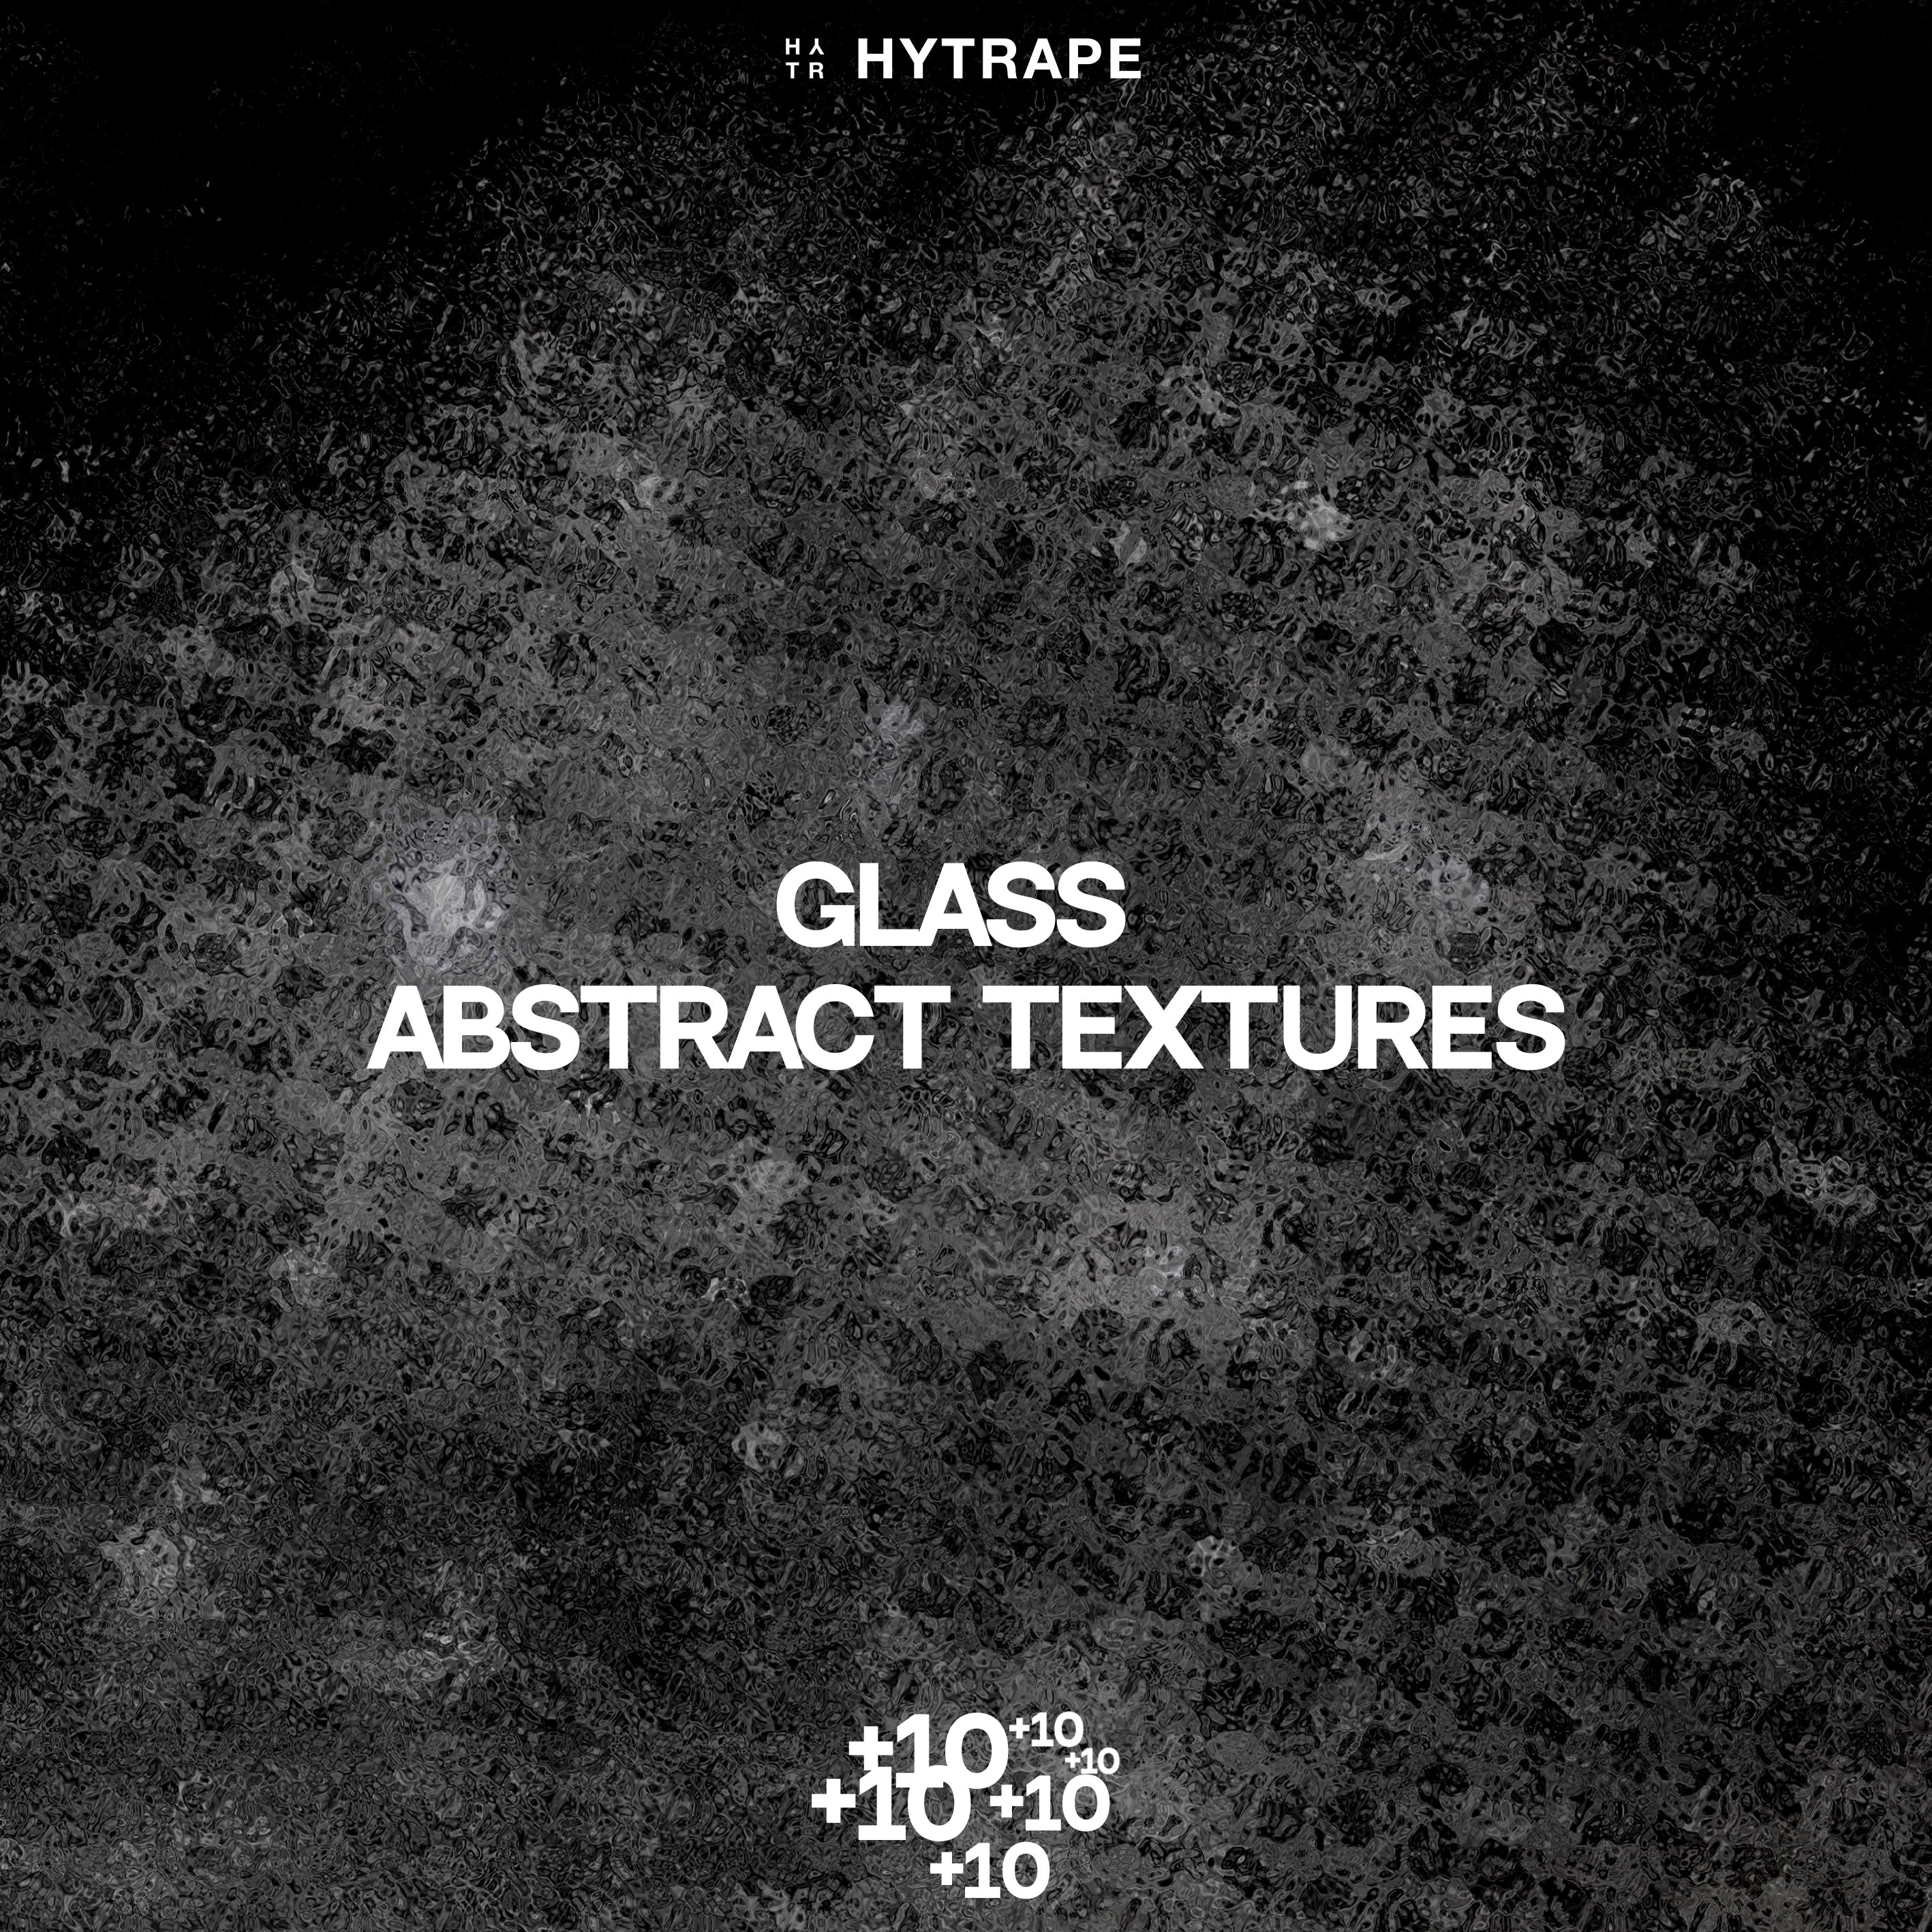 +10 GLASS ABSTRACT TEXTURES (FREE)